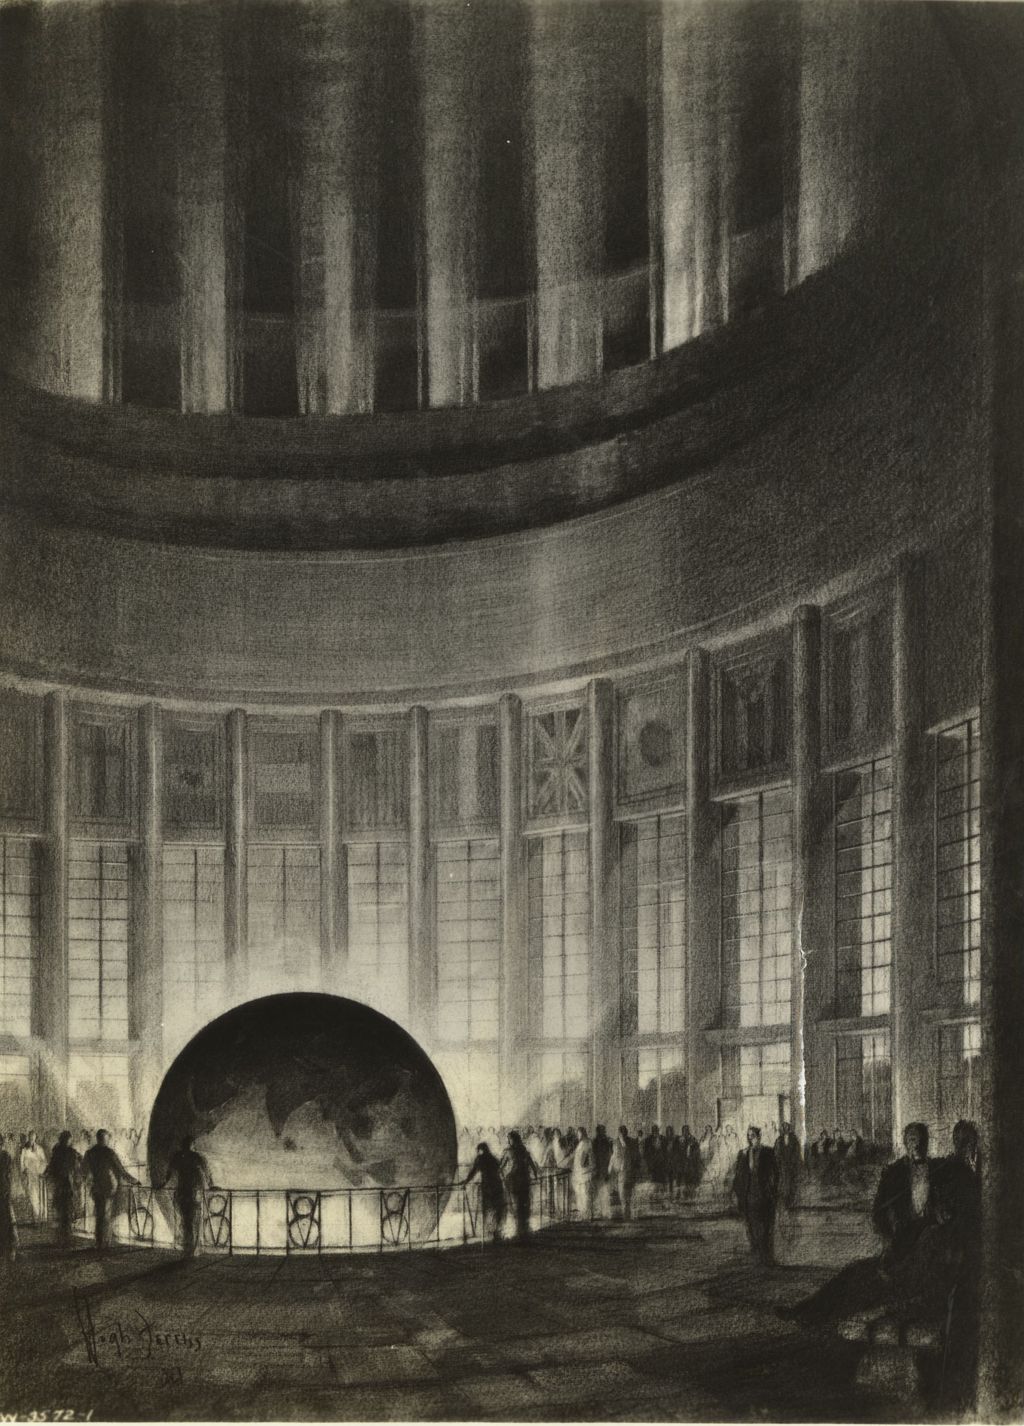 Drawing of electrically driven globe in 'Ford World' exhibit in New World's Fair